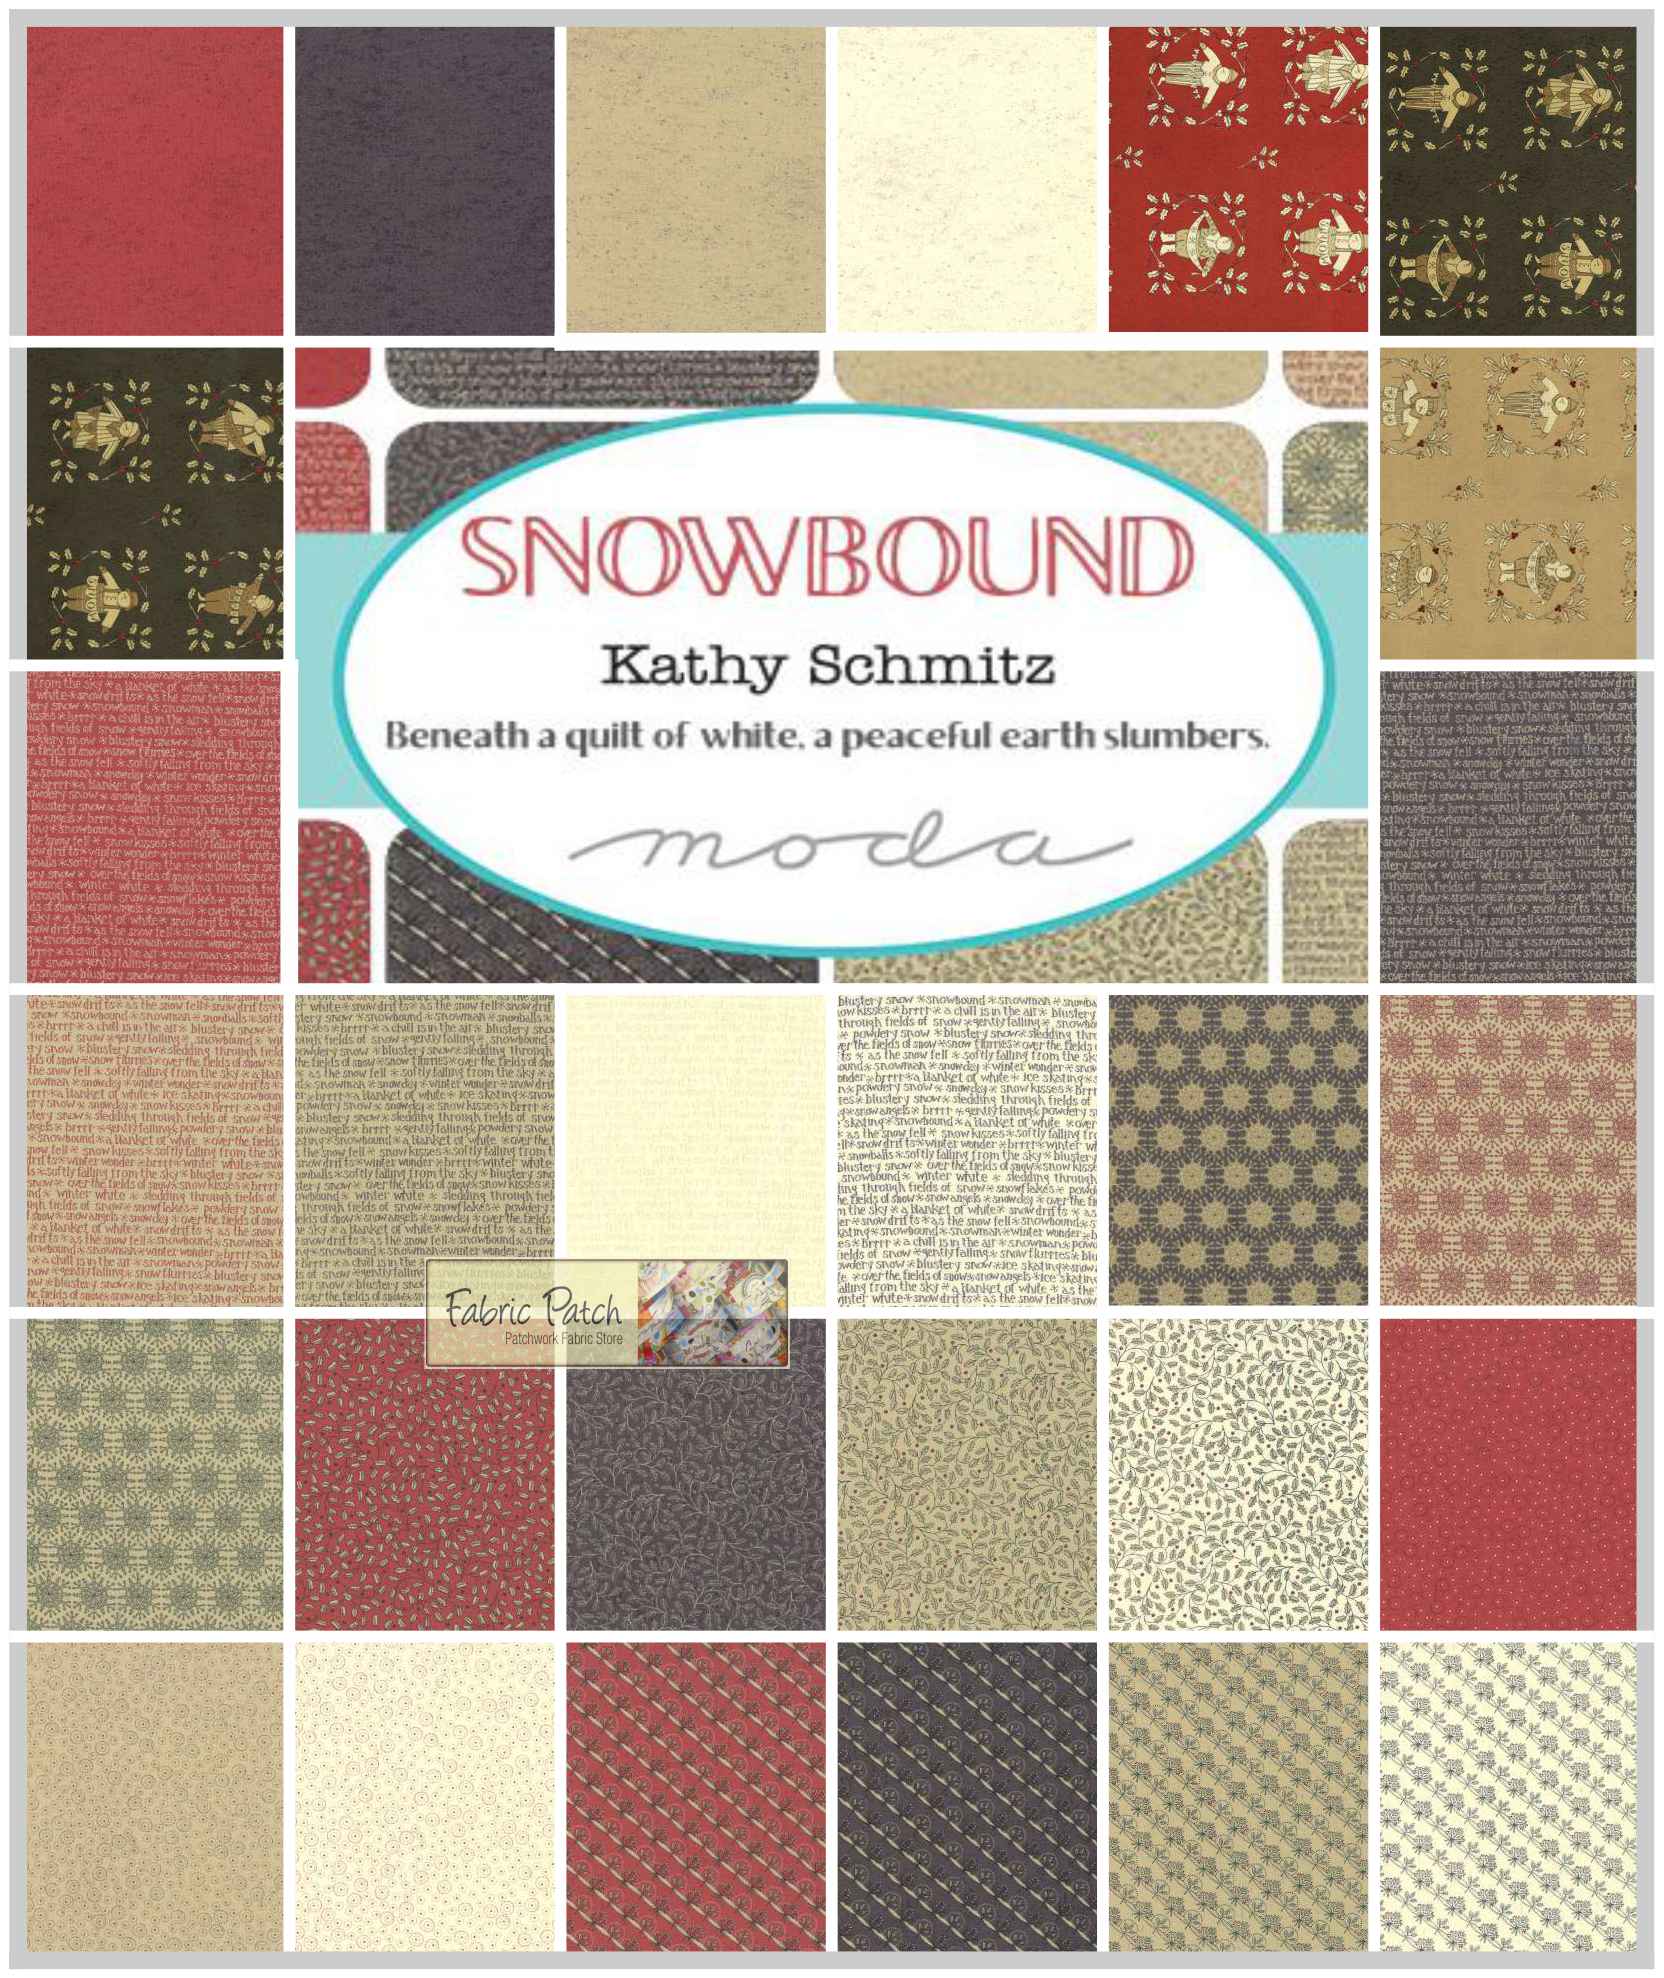 Snowbound Charm Pack by Kathy Schmitz for Moda Fabrics - patchwork and quilting fabric